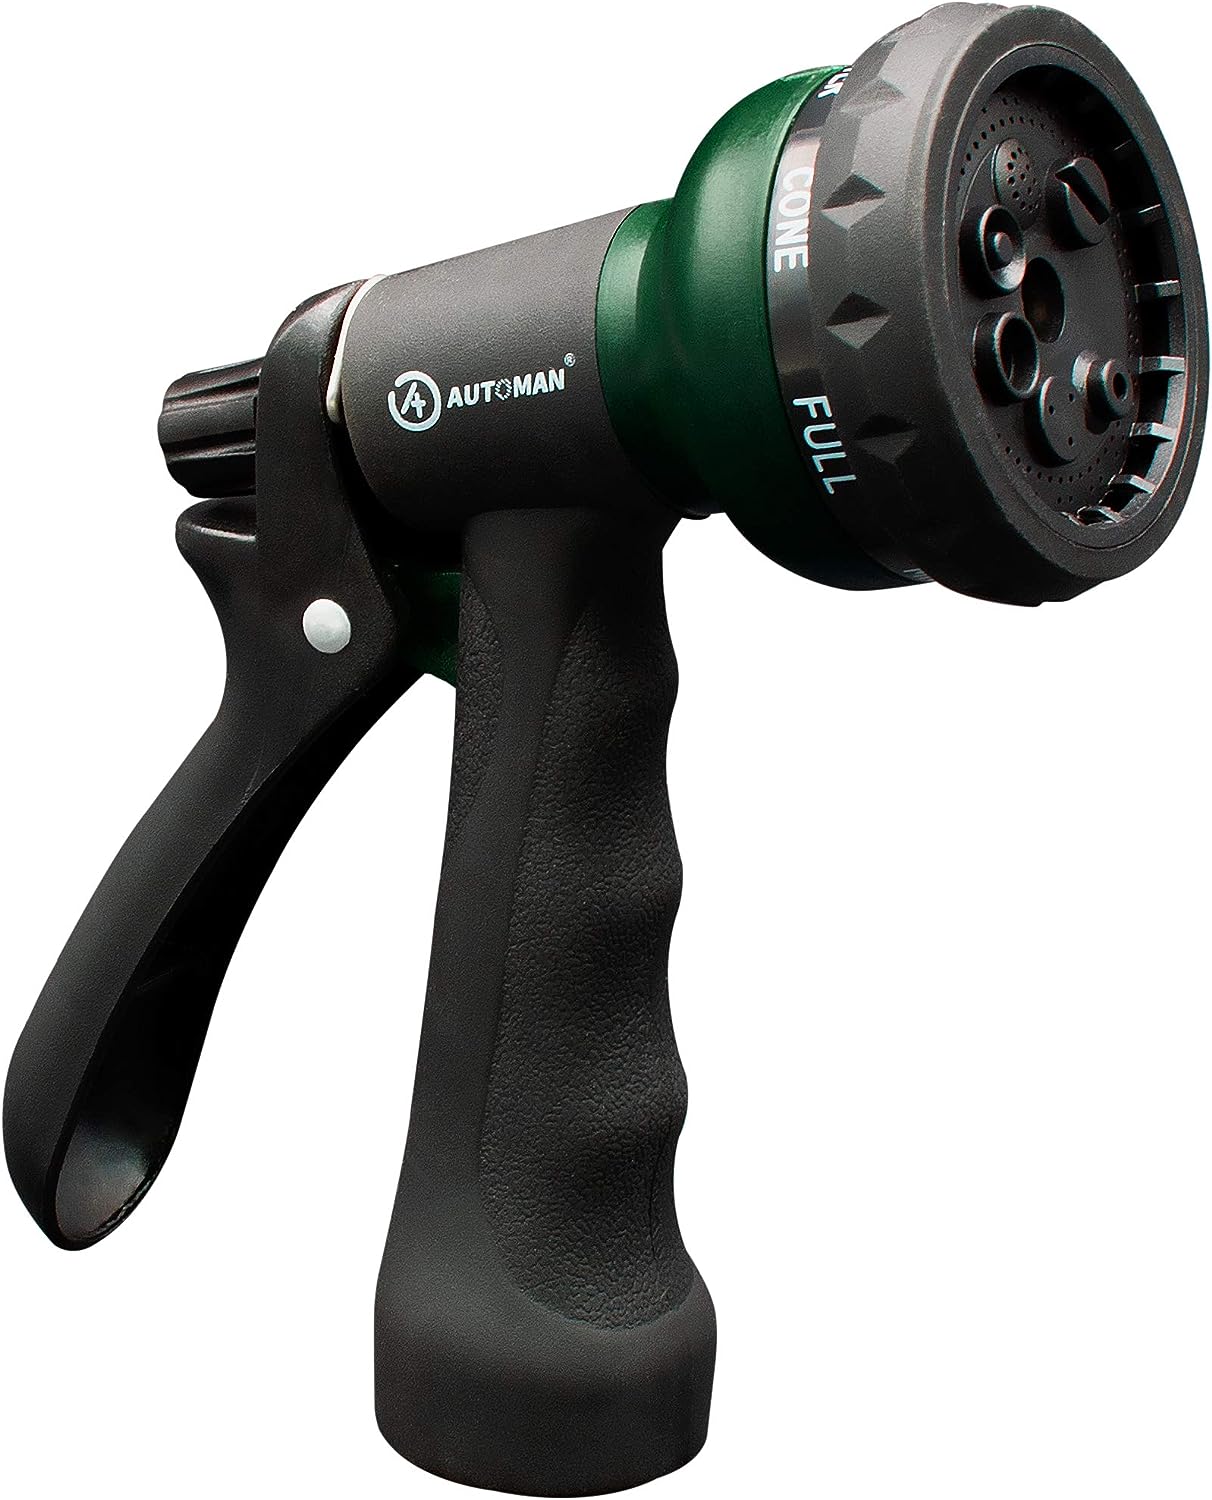 hose spray nozzle detailed review